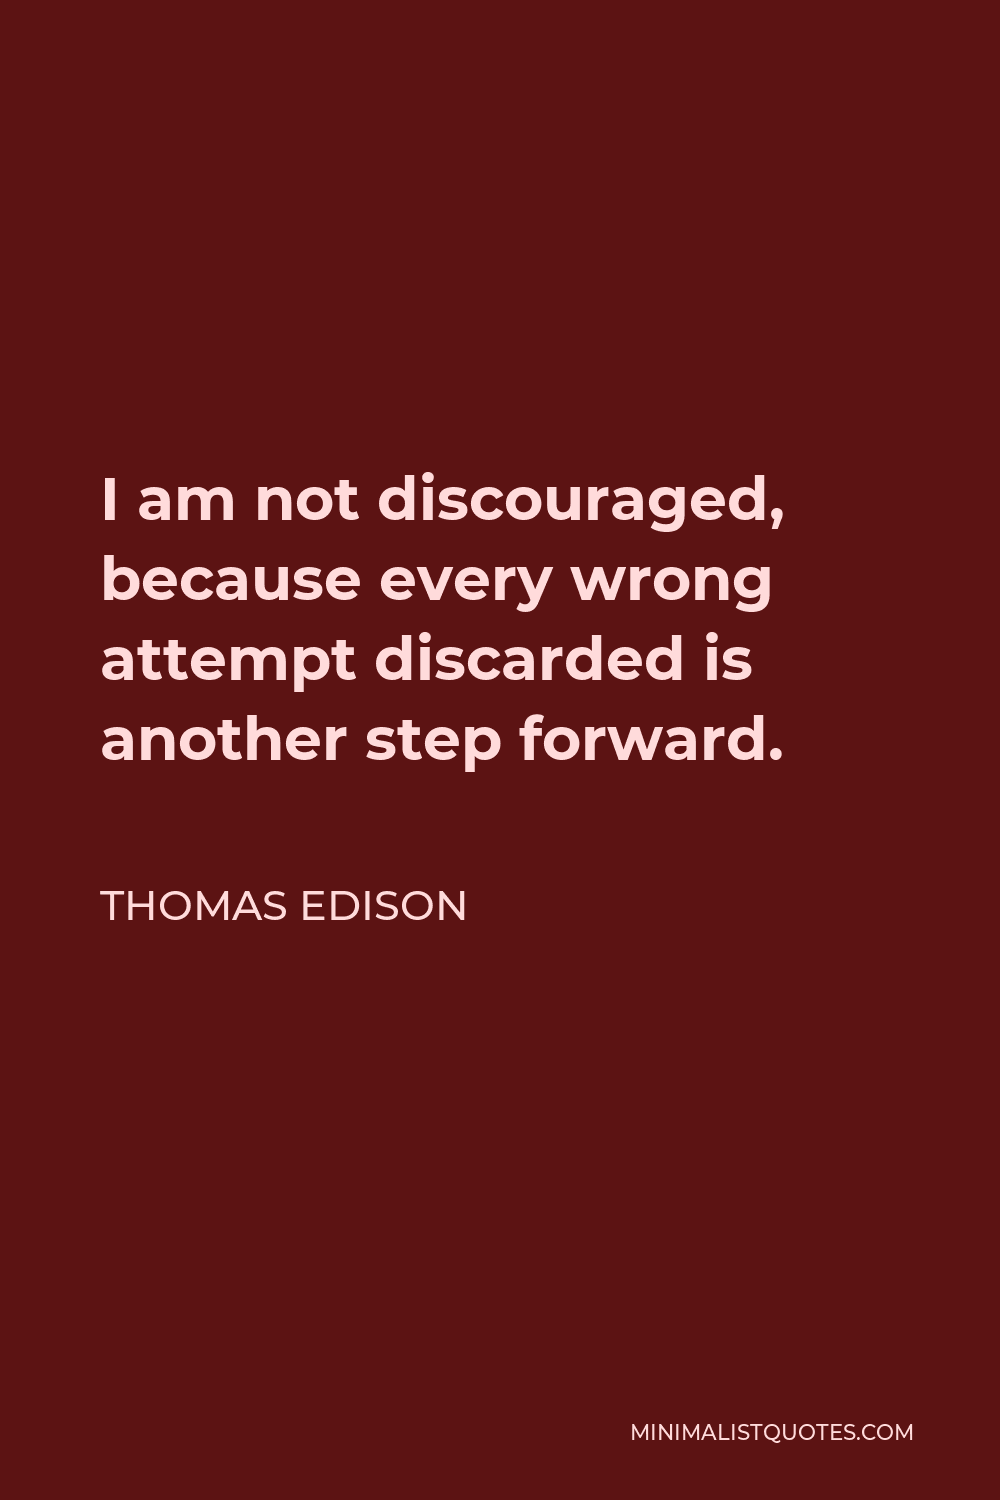 Thomas Edison Quote - I am not discouraged, because every wrong attempt discarded is another step forward.